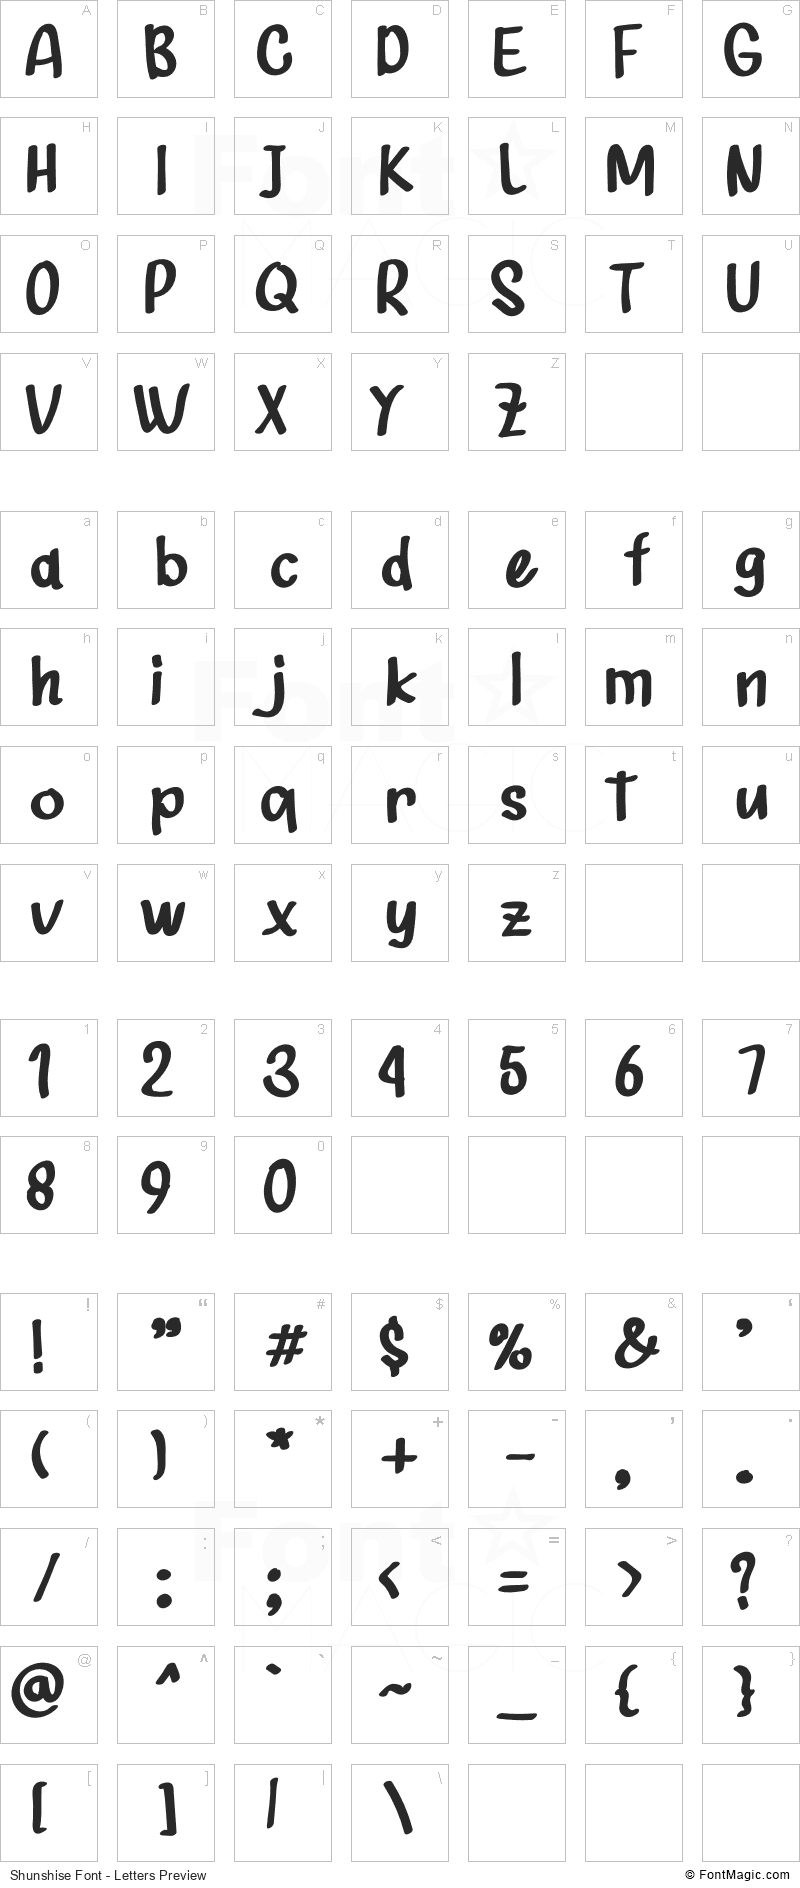 Shunshise Font - All Latters Preview Chart